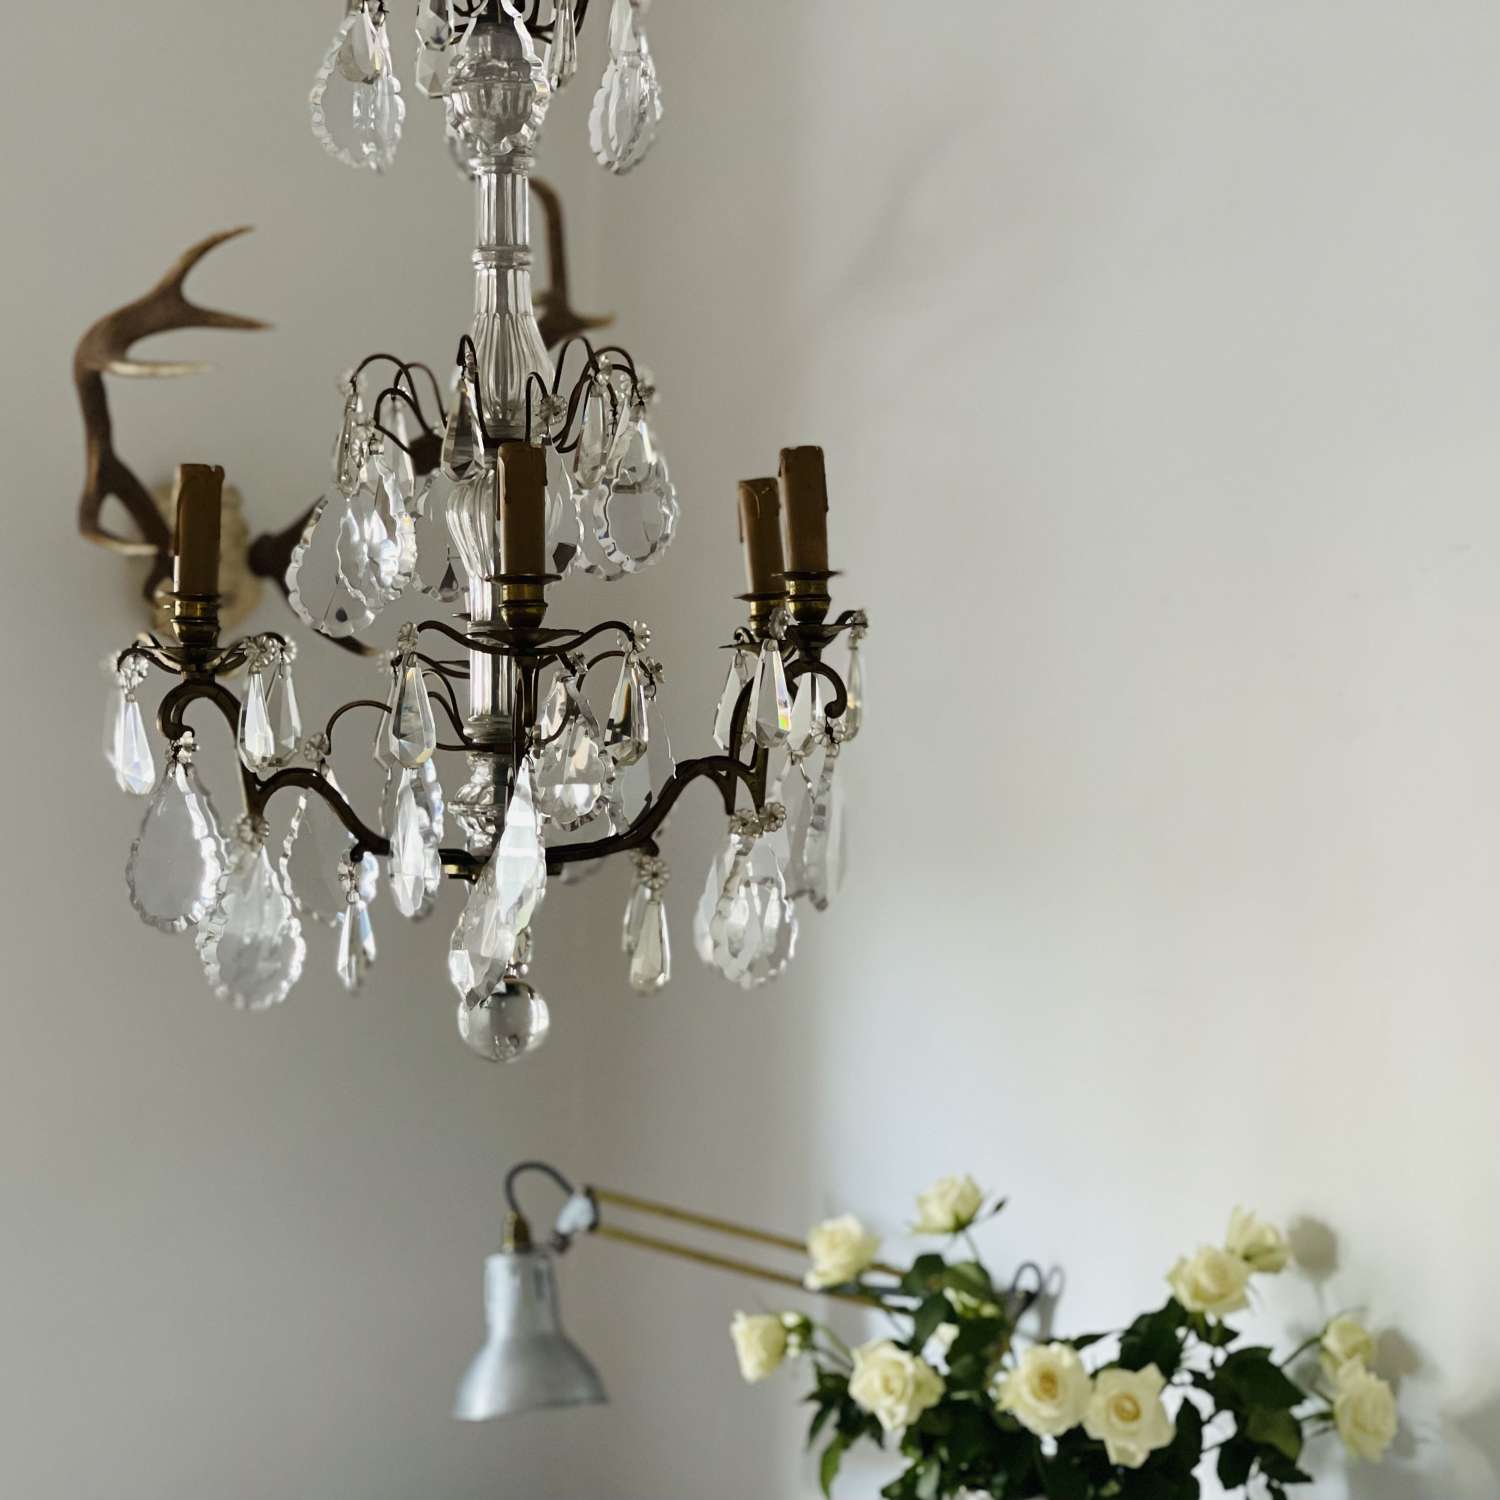 Antique French crystal 6 arm chandelier